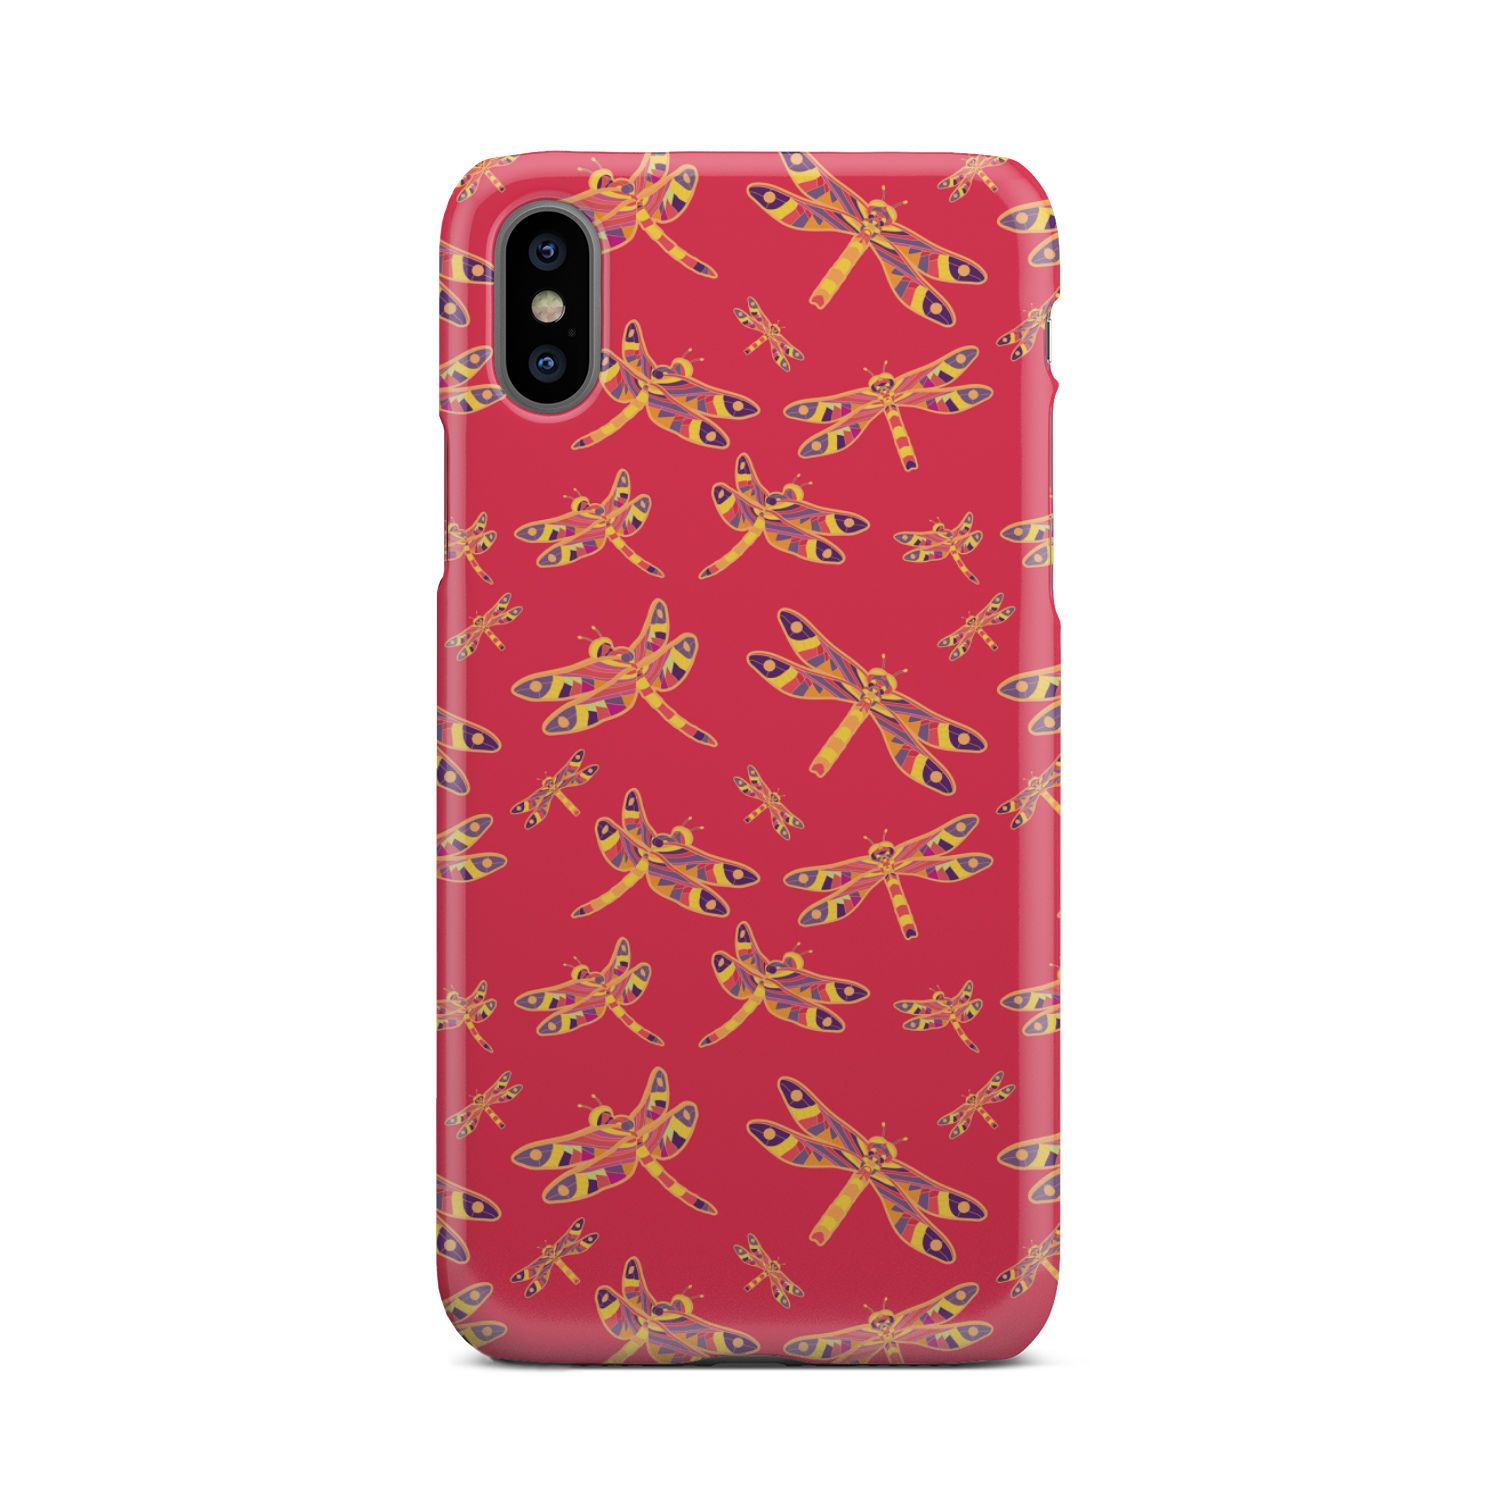 Gathering Rouge Phone Case Phone Case wc-fulfillment iPhone X 